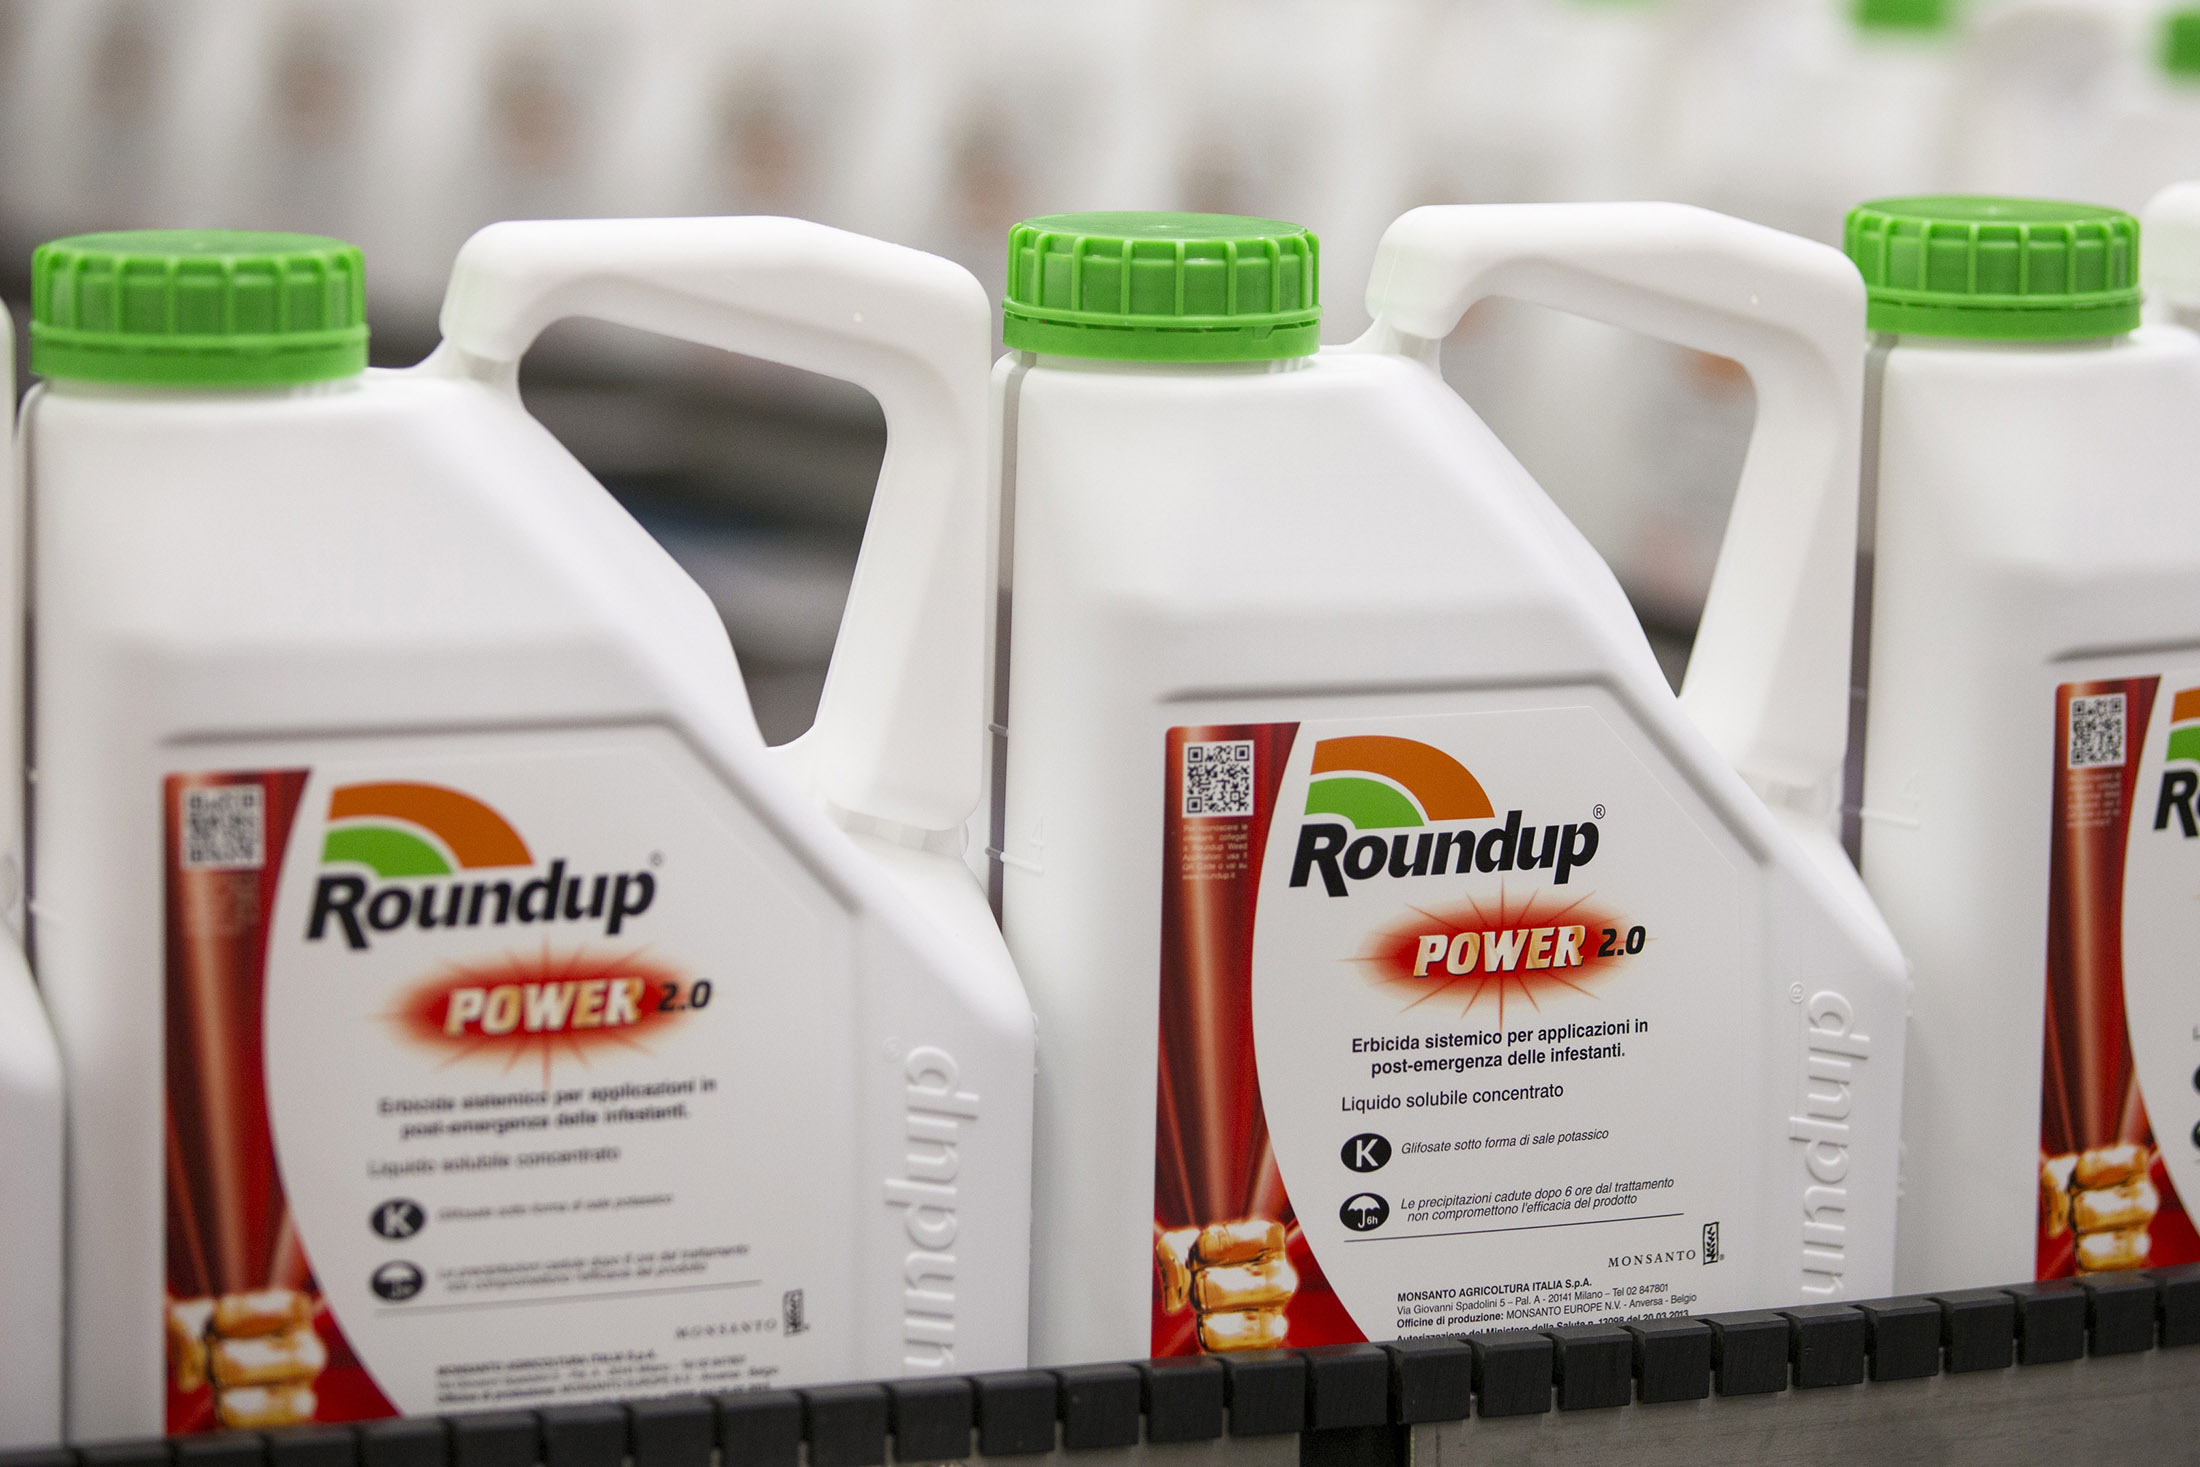 Why U.S. Cities Are Banning Glyphosate Pesticides - Bloomberg